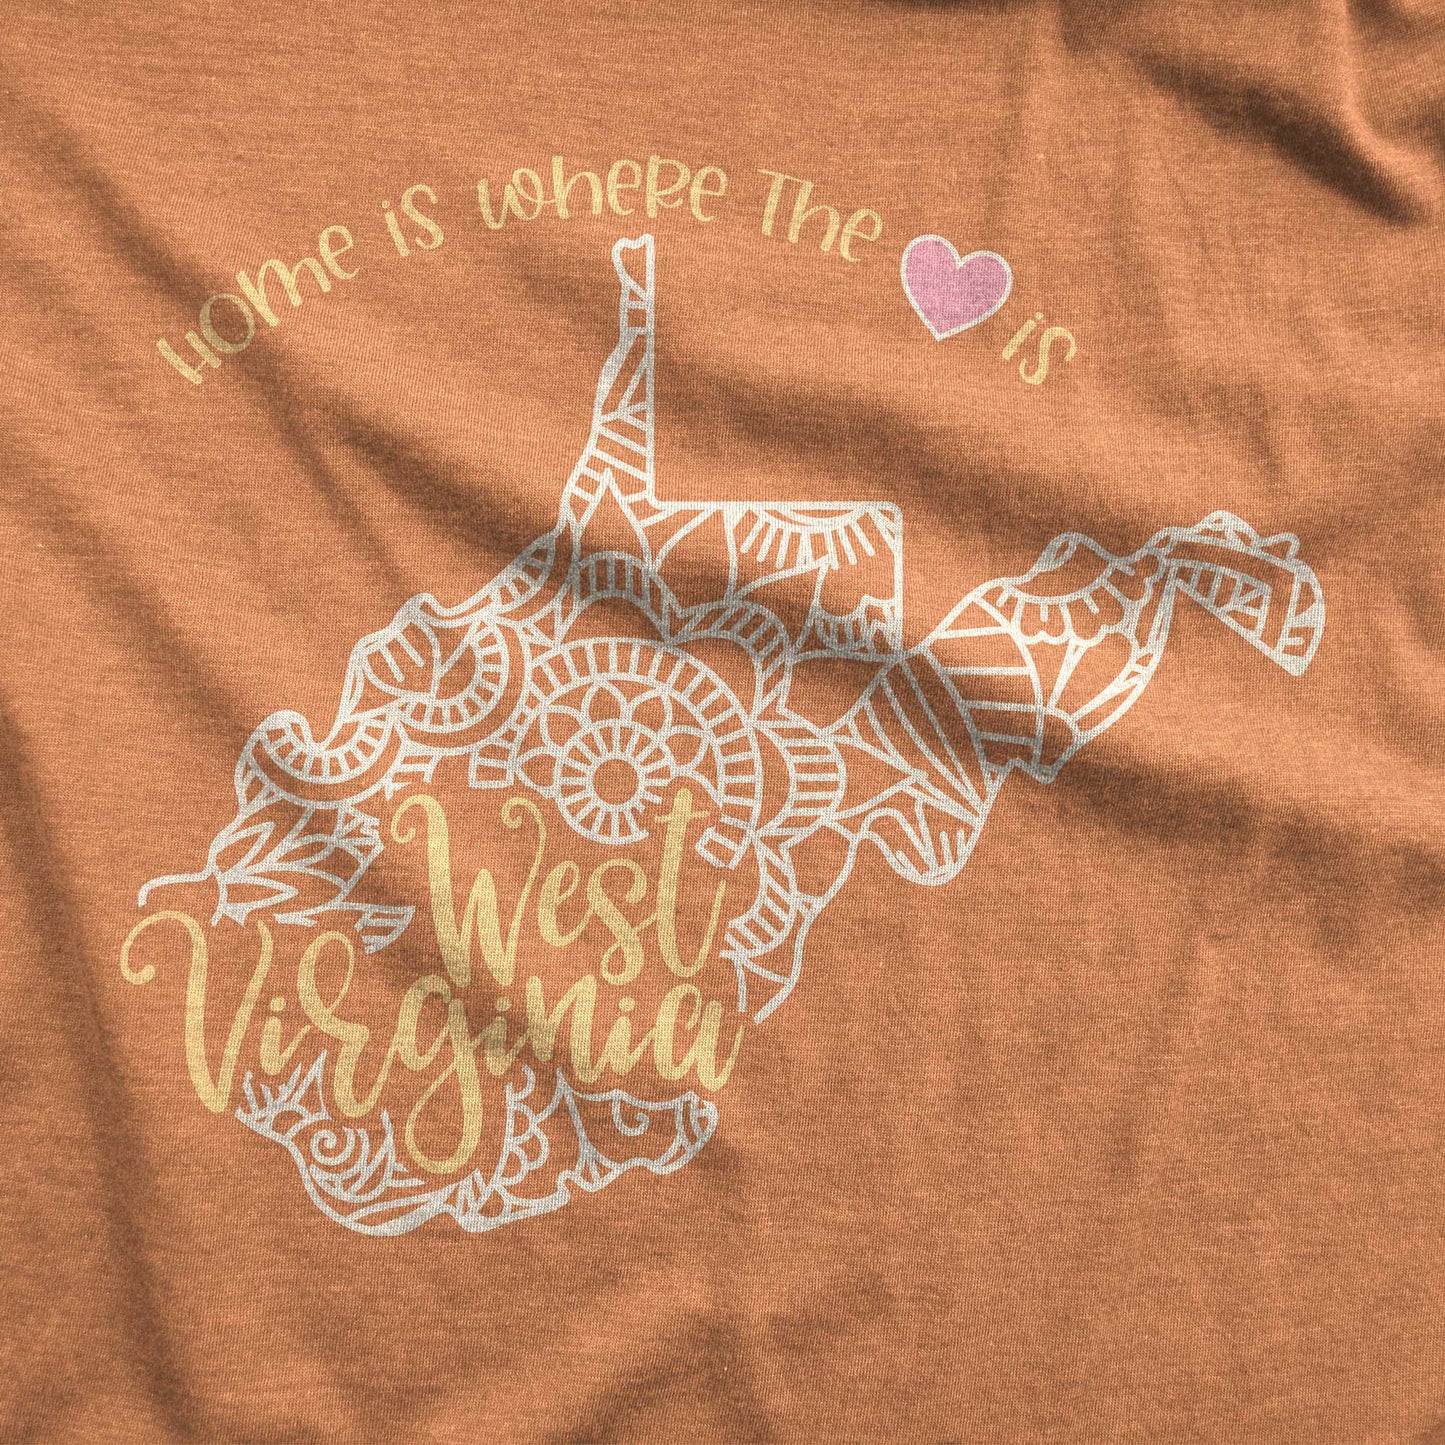 West Virginia: Home is Where the Heart Is - Adult Unisex Jersey Crew Tee